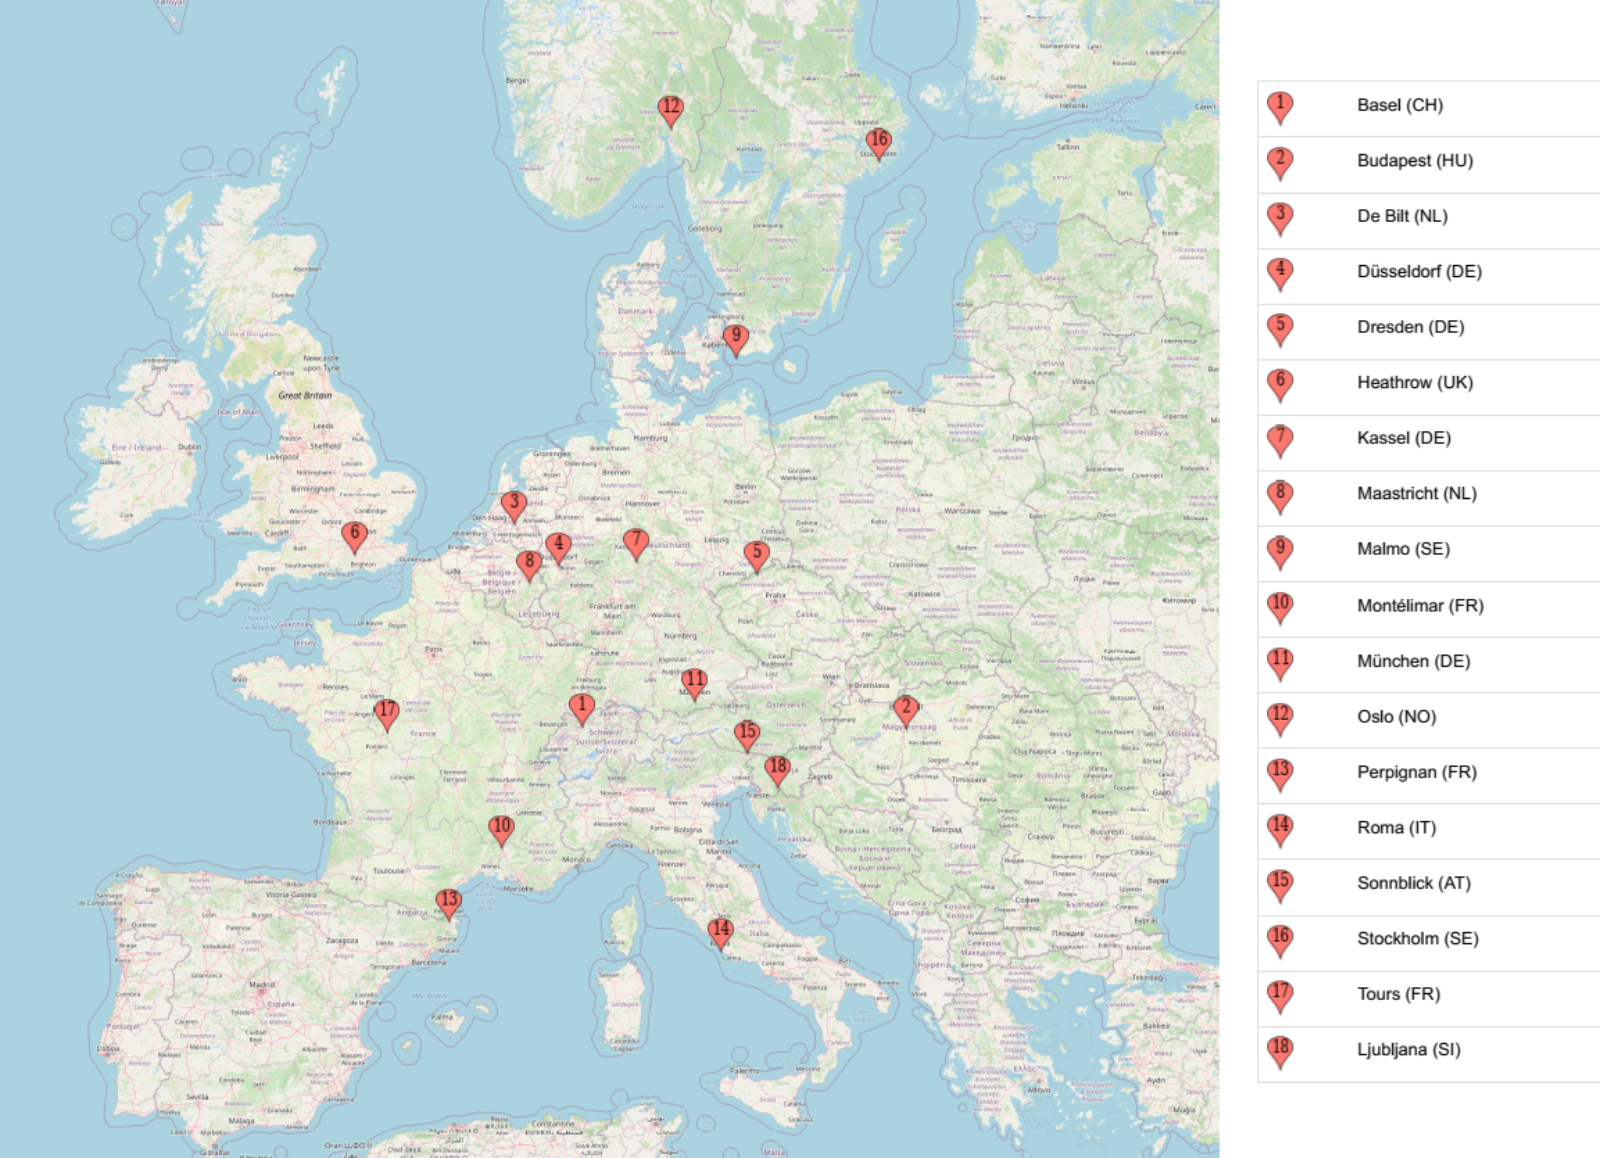 18 European locations in the weather prediction dataset